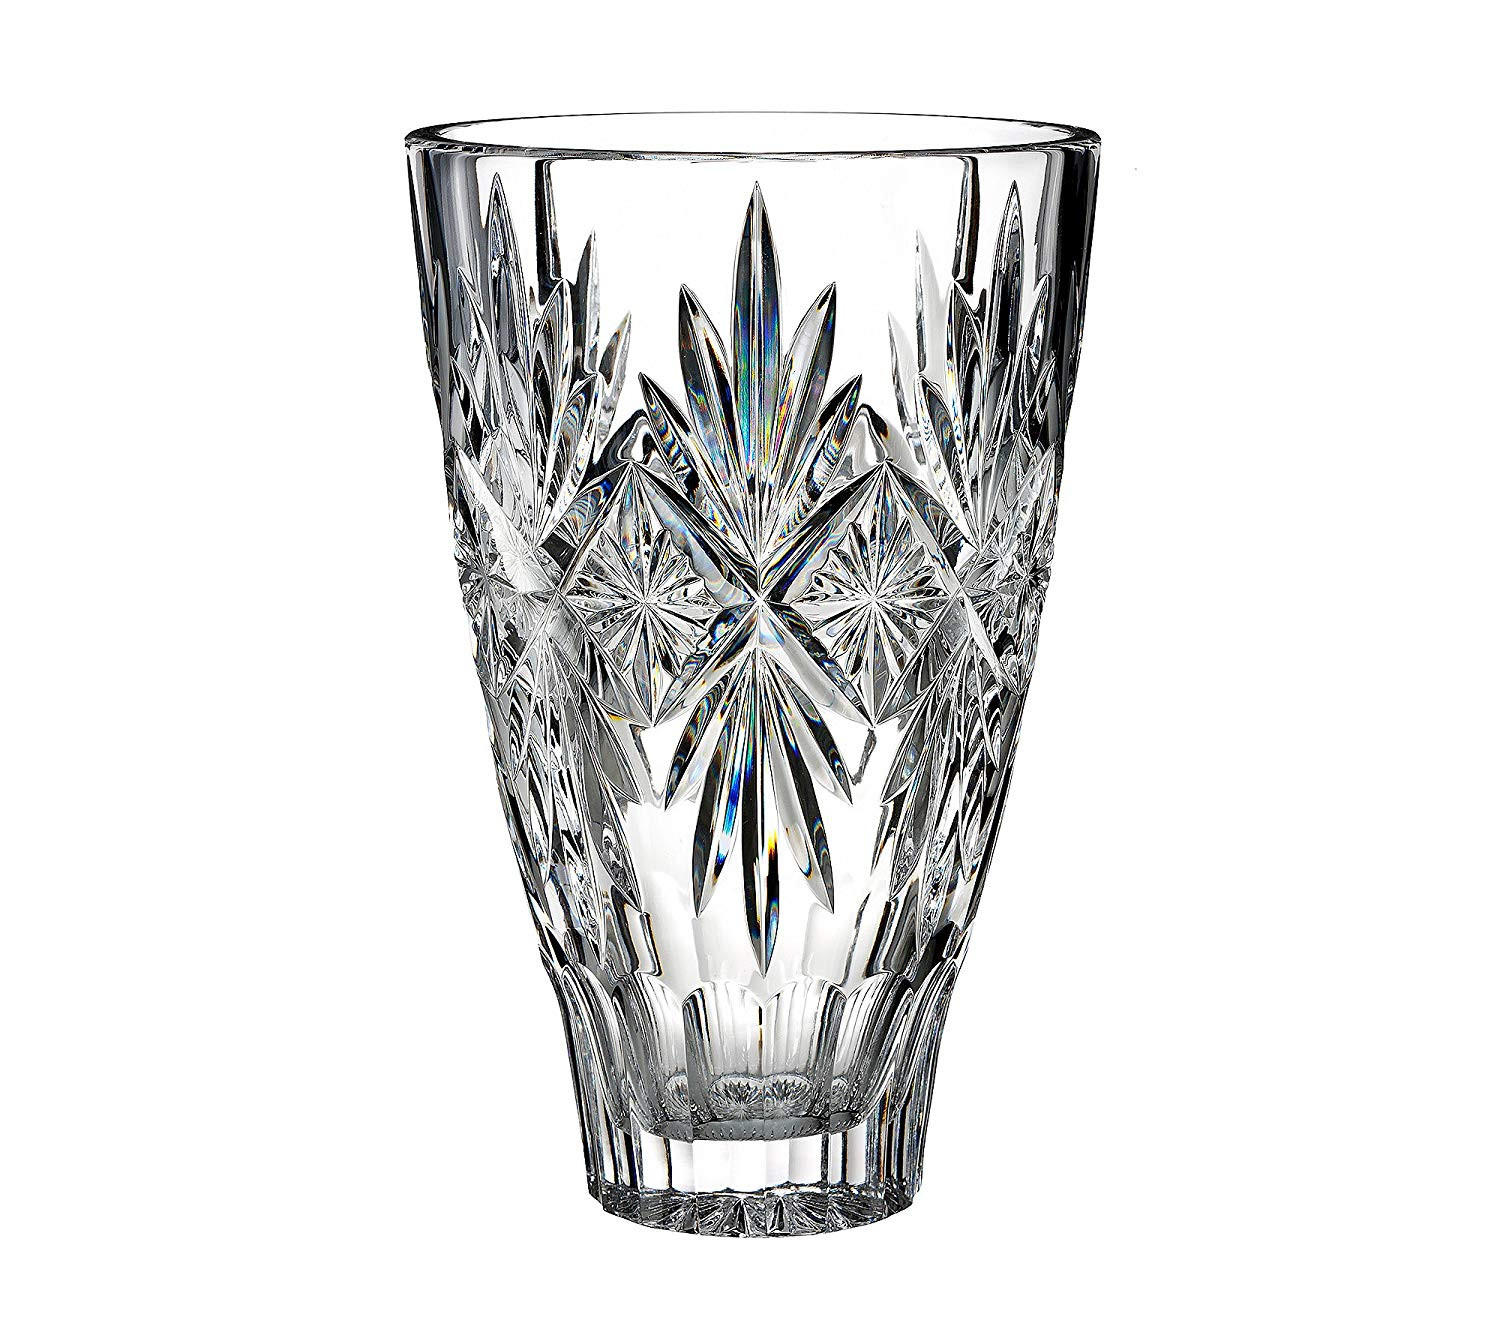 30 Great Marquis by Waterford Rainfall Vase 11 2024 free download marquis by waterford rainfall vase 11 of amazon com waterford normandy vase home kitchen with 912uf oesel sl1500